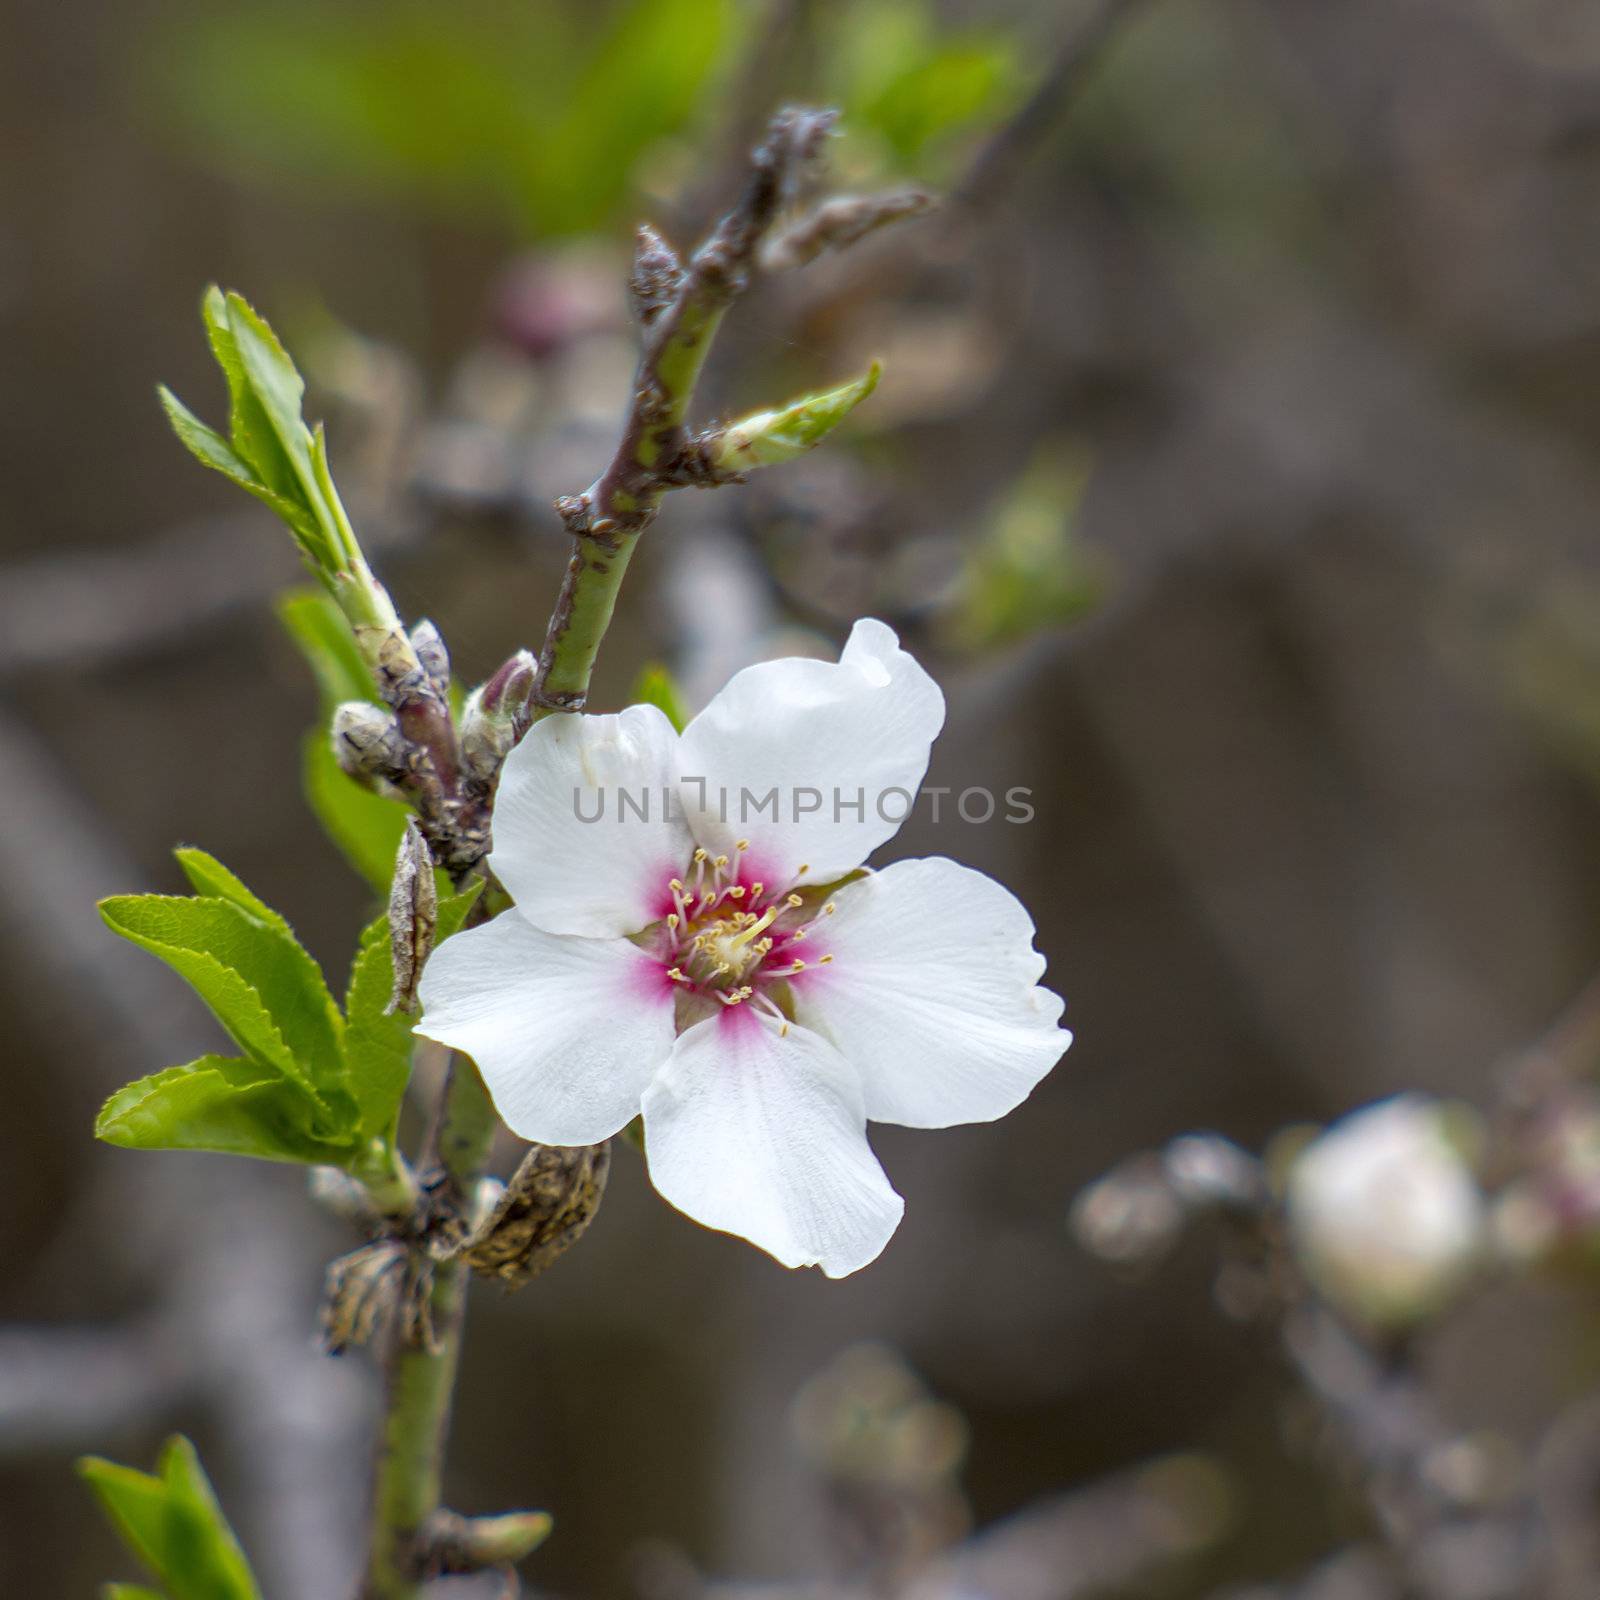 A closeup of an almond tree with white flower